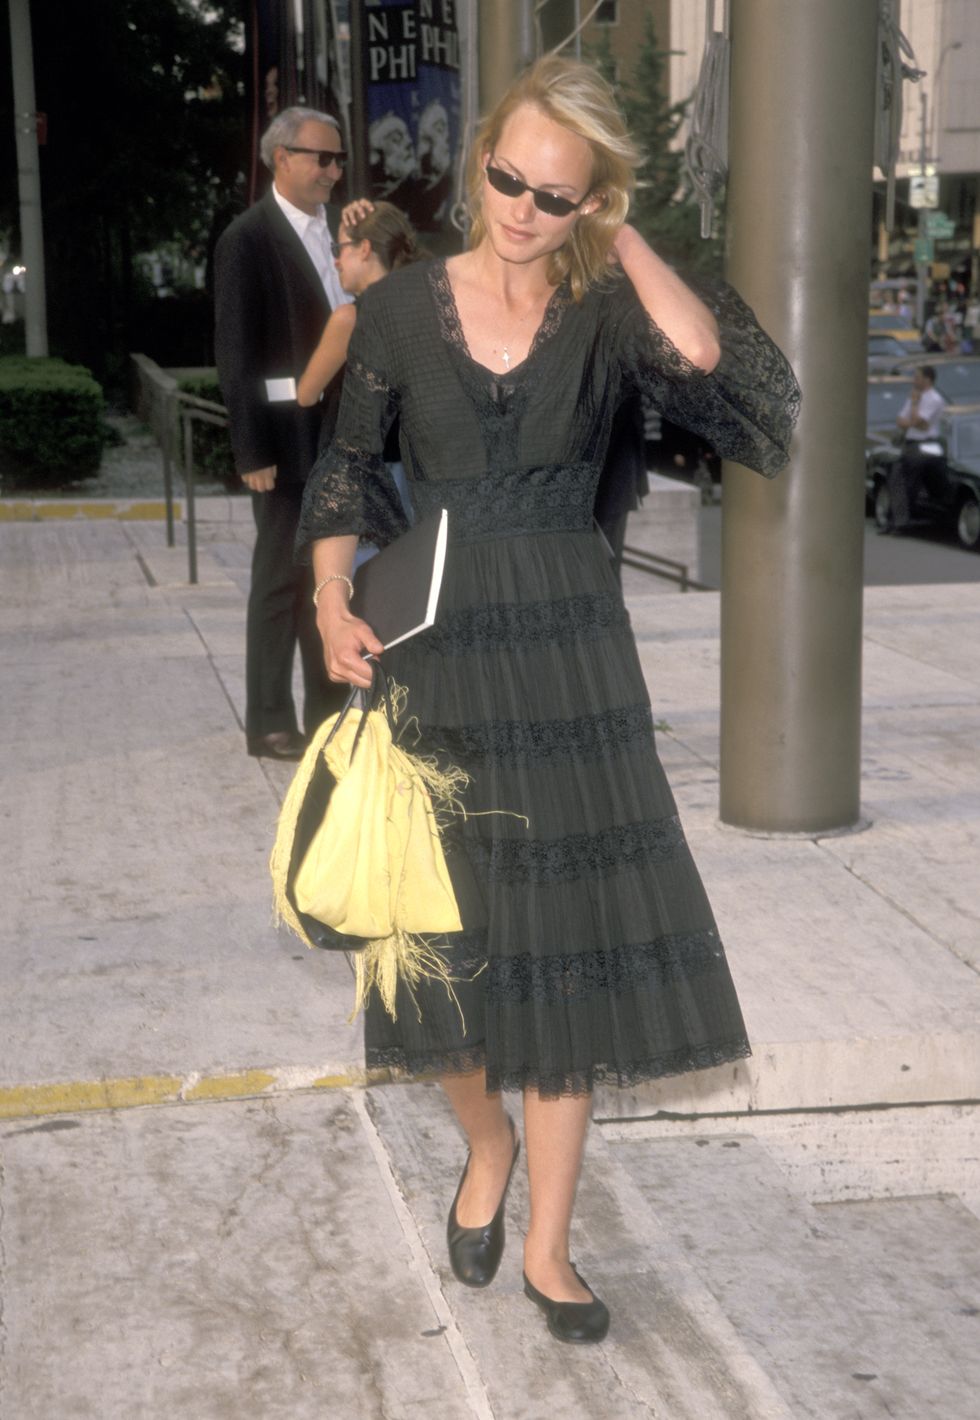 new york city   june 1  model amber valletta attends the memorial service for liz tilberis on june 1, 1999 at avery fisher hall, lincoln center in new york city, new yorkphoto by ron galella, ltdron galella collection via getty images